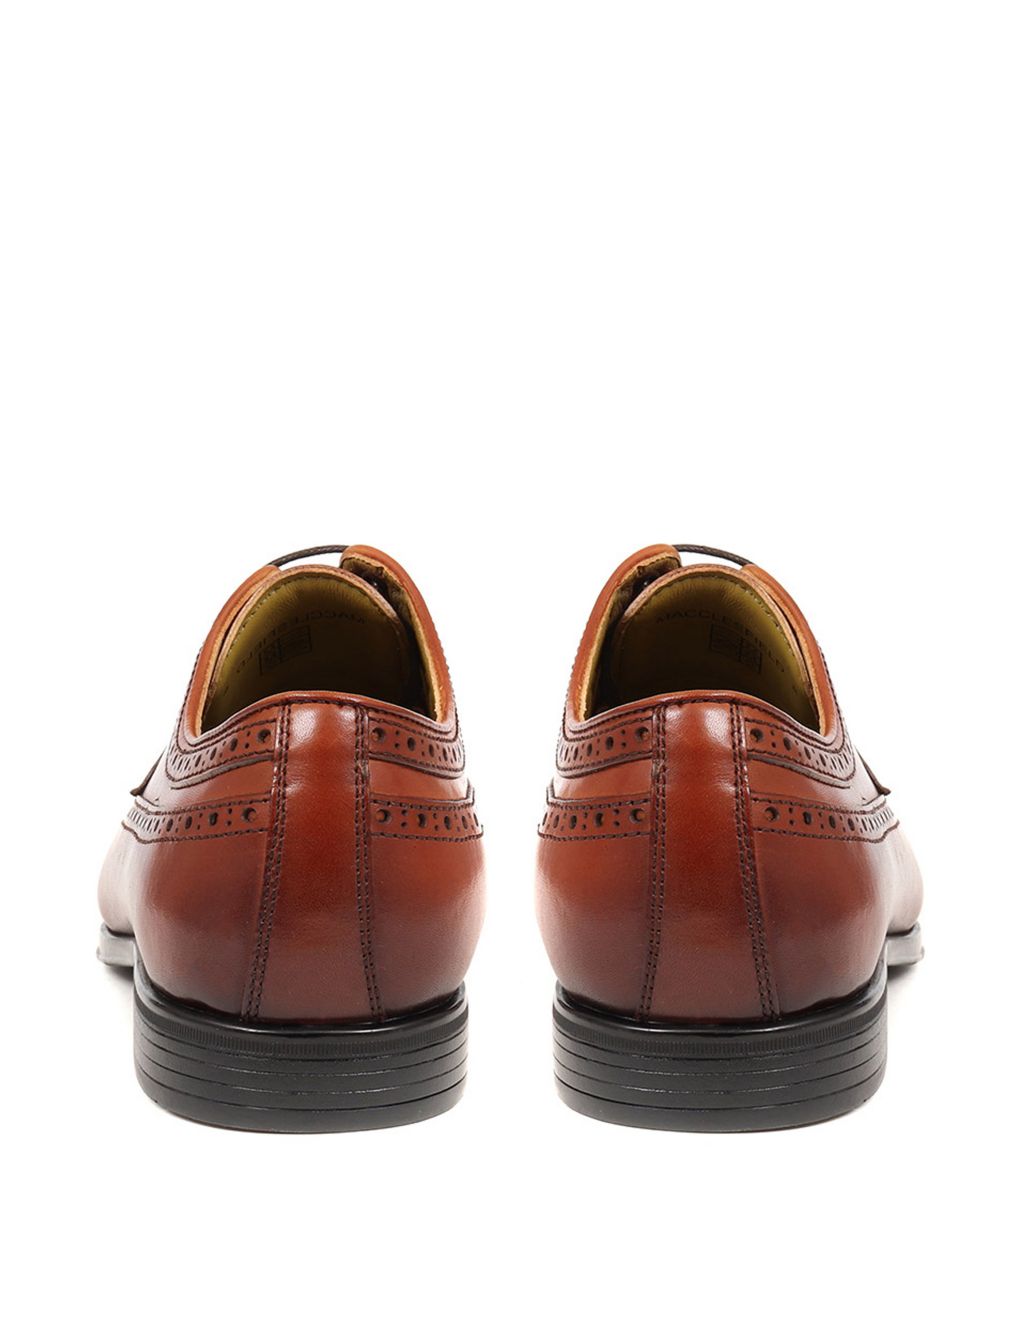 Leather Brogues image 5